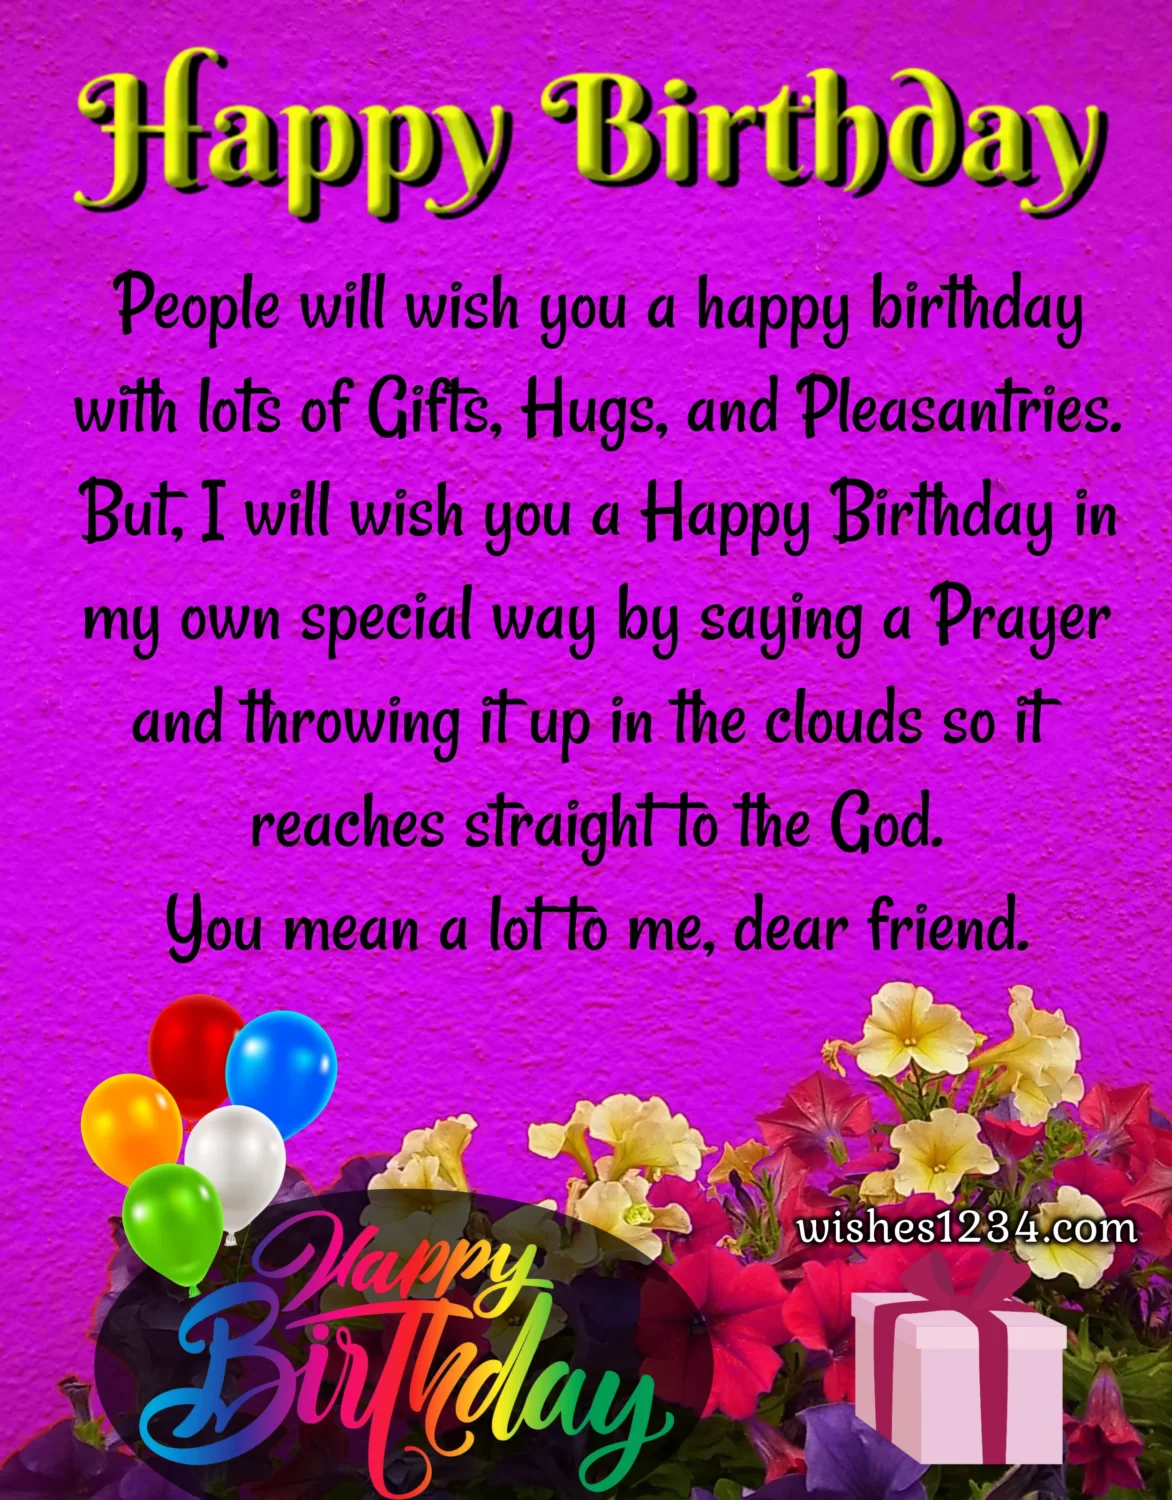 Happy birthday friend wishes with pancy flowers, Birthday Wishes for Friend Girl.